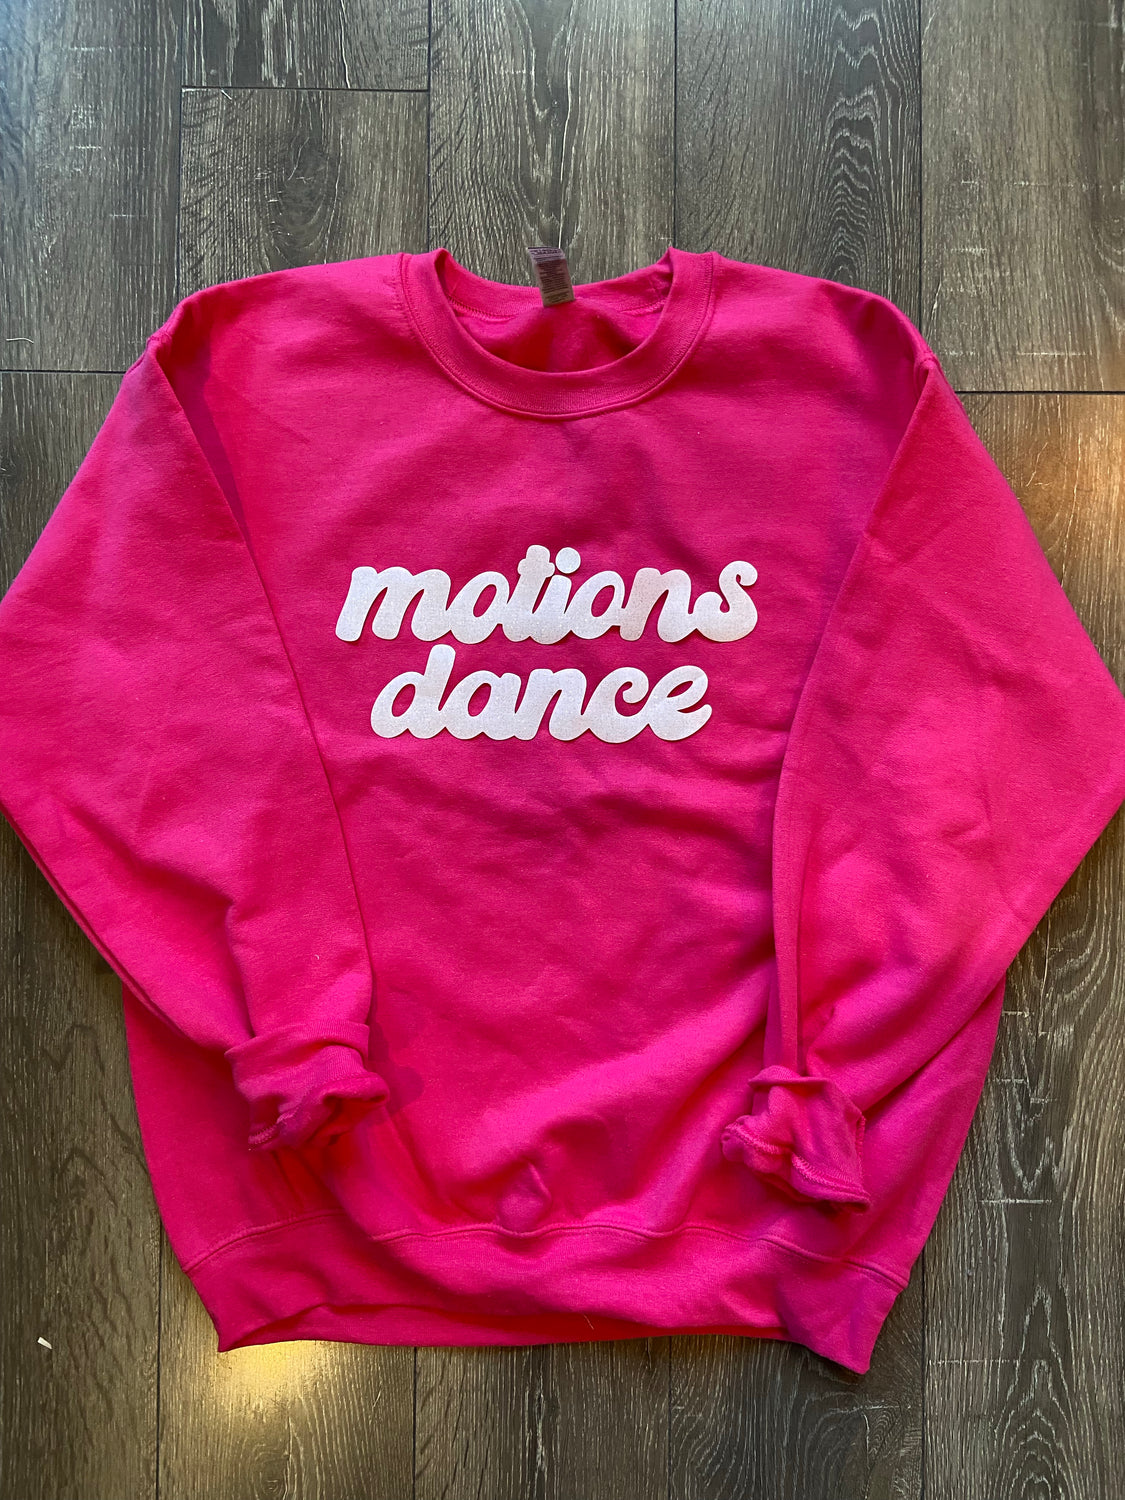 MOTIONS DANCE - HOT PINK CREW